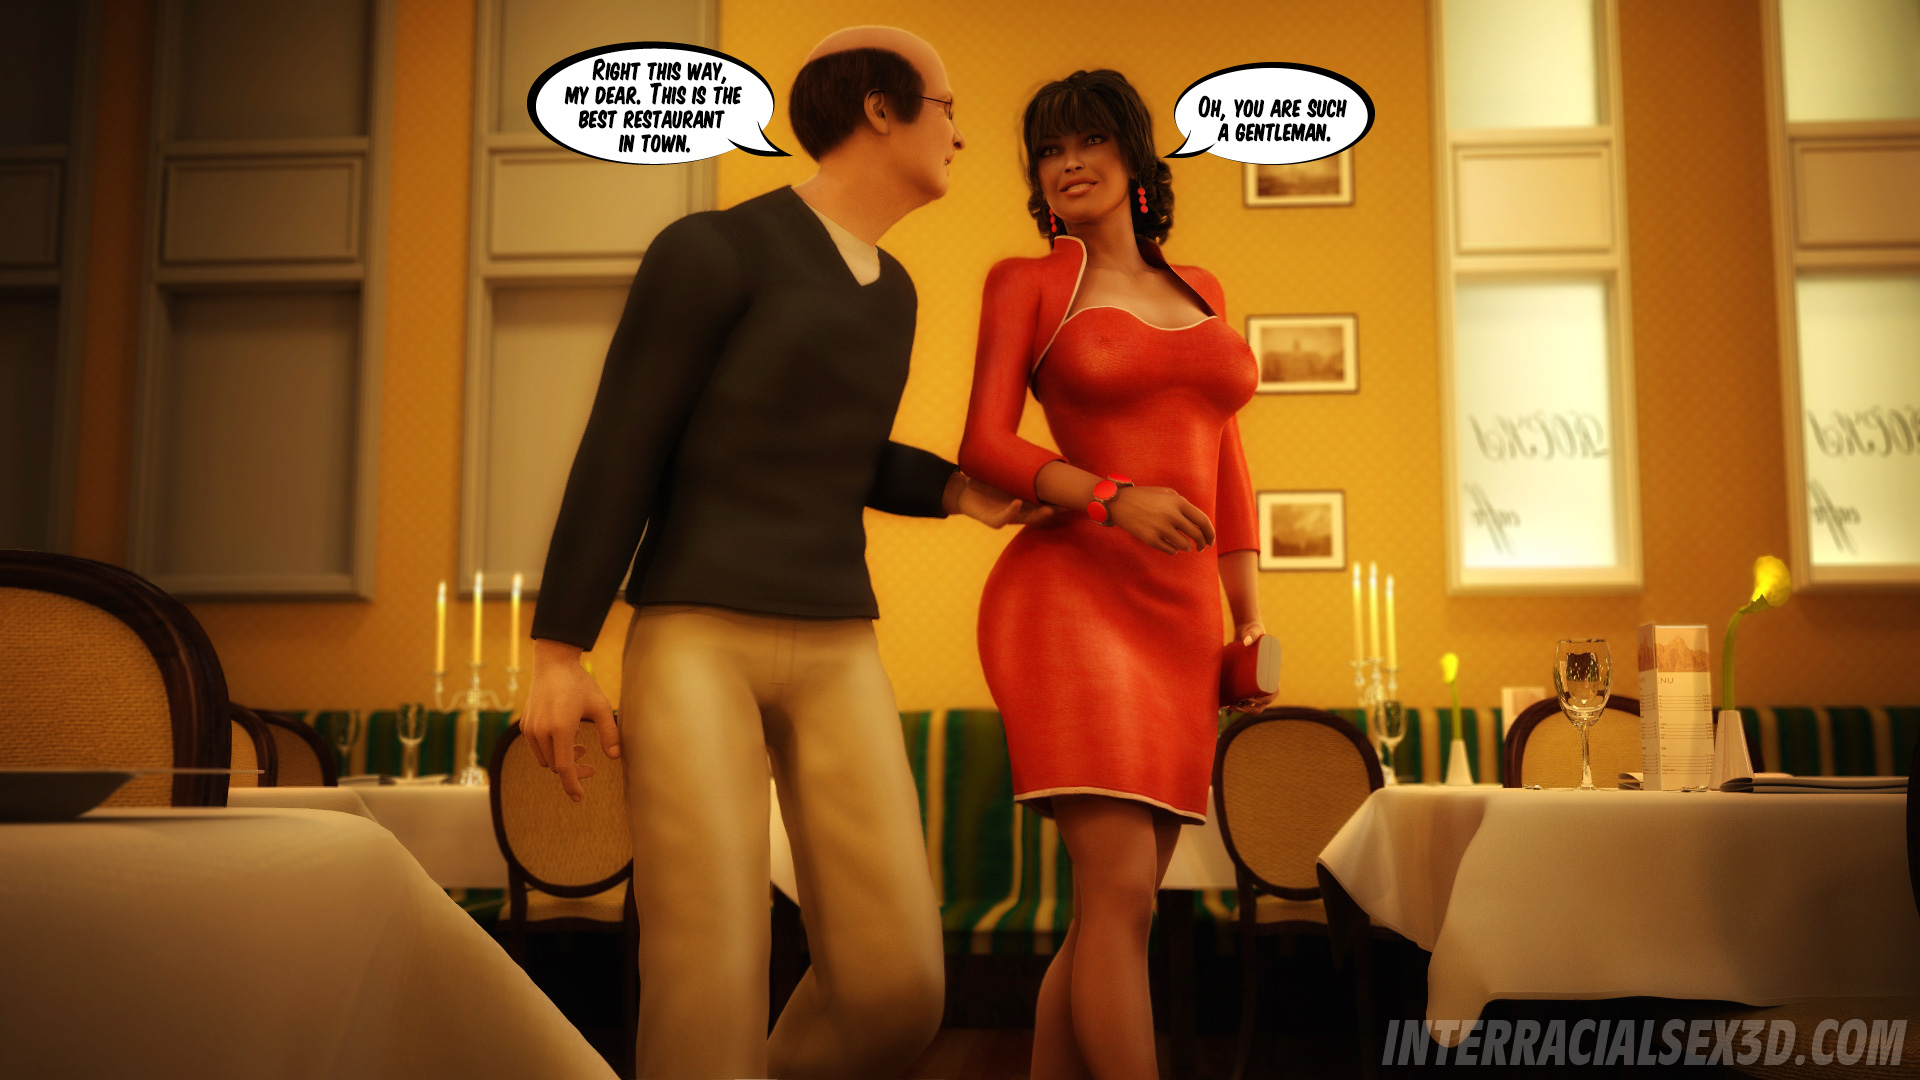 Wedding Anniversary and Cheating Wife Interracialsex3D - Wedding Anniversary and Cheating Wife photo